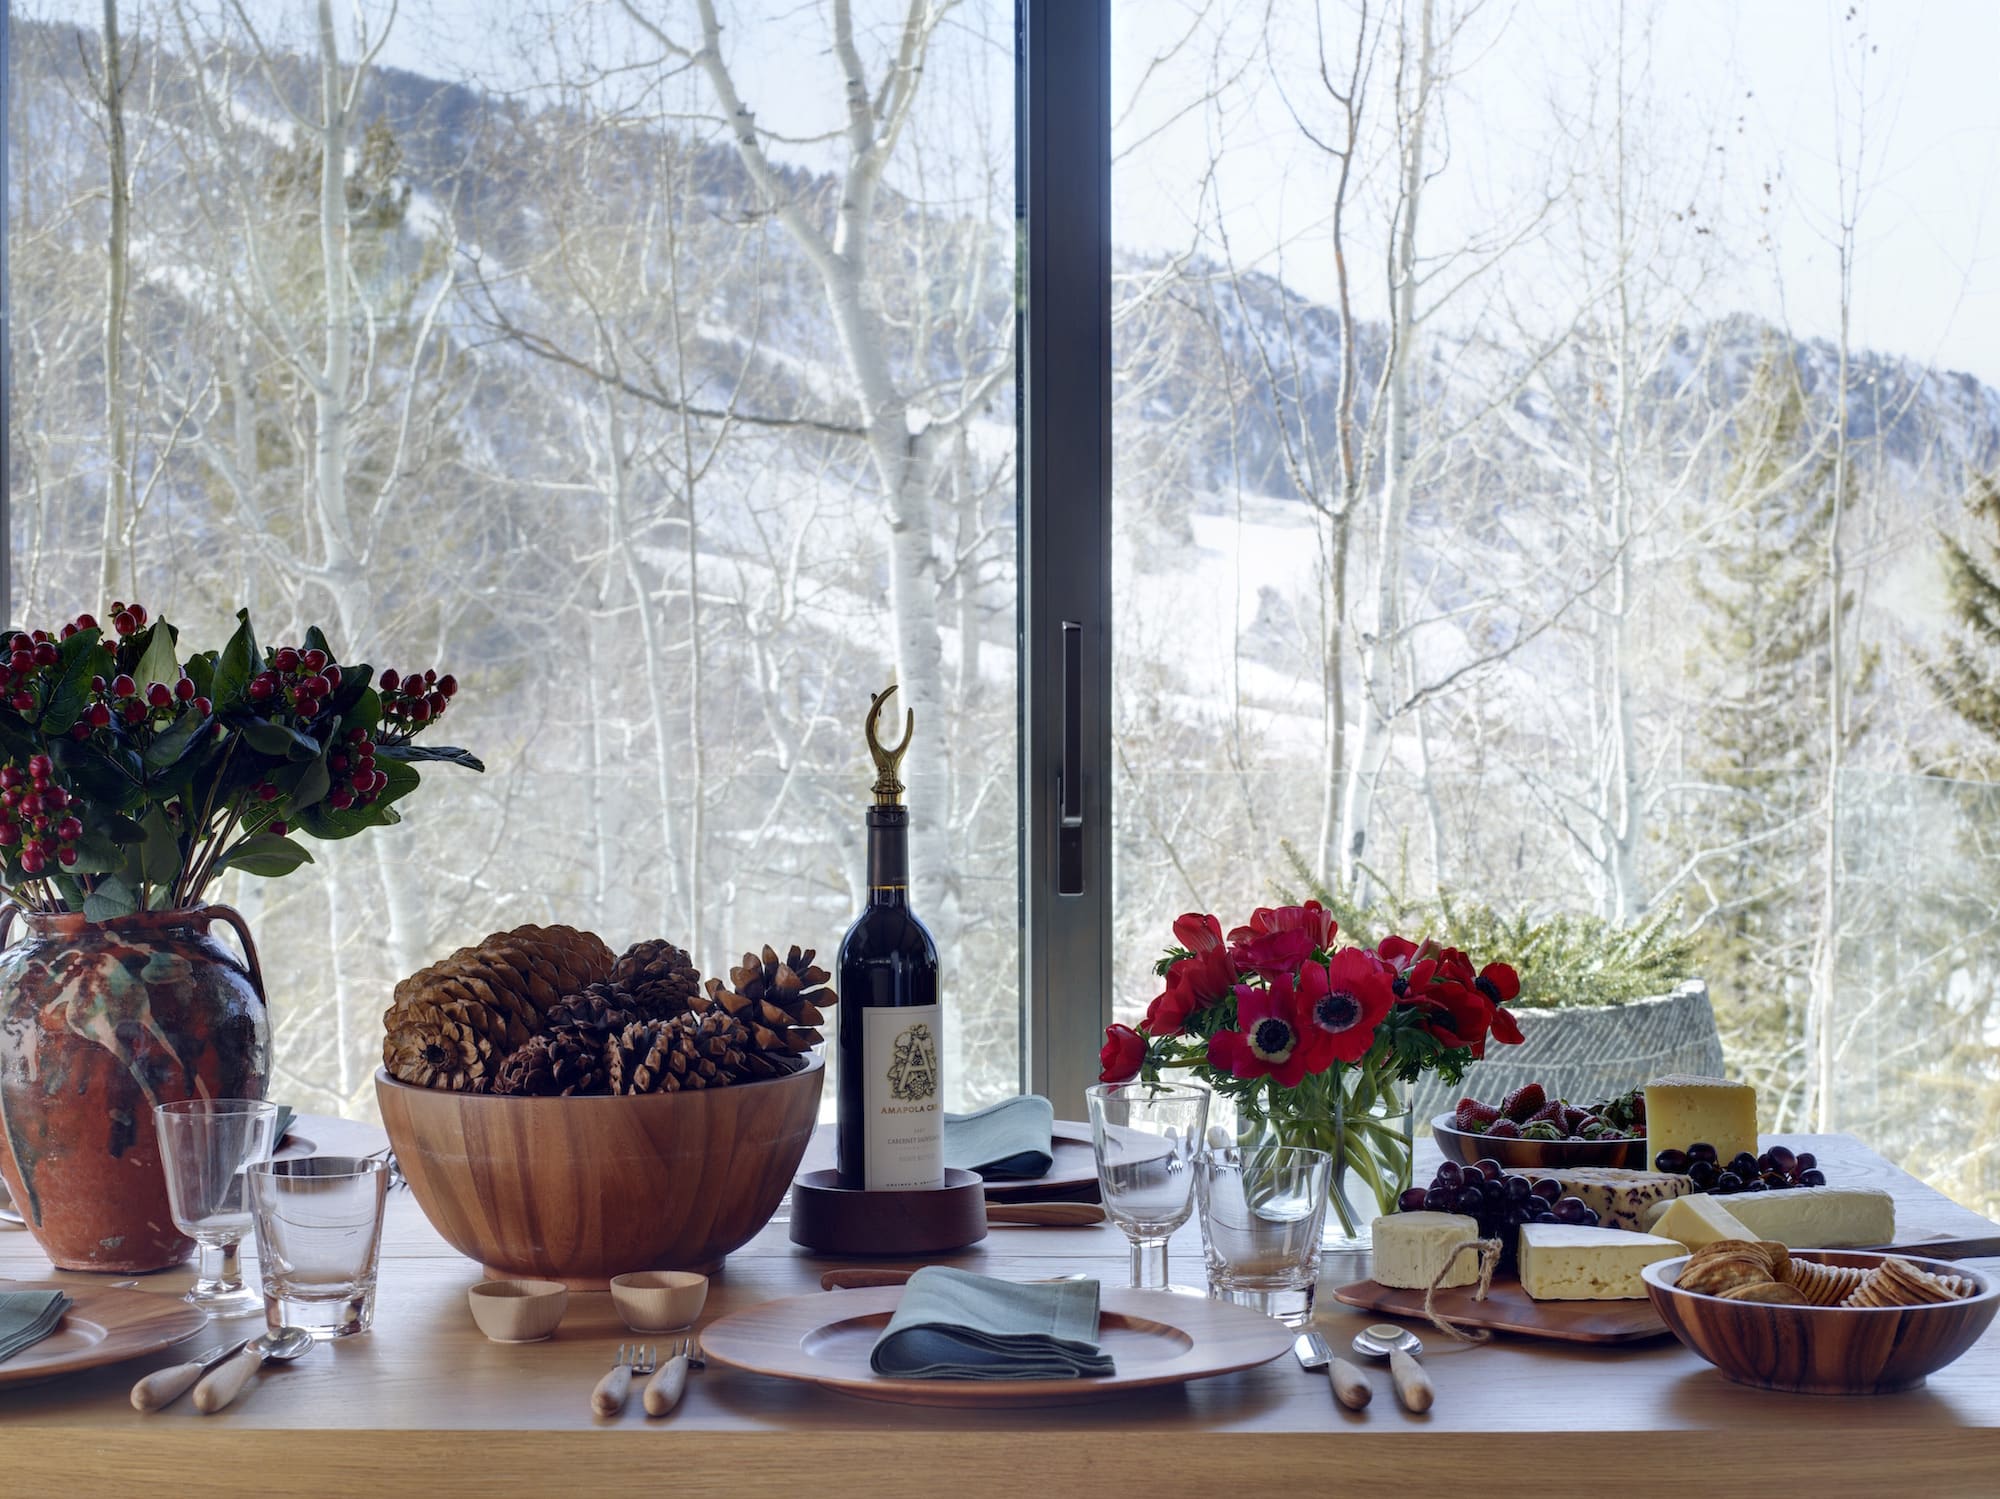 A tablescape and mountain view in Aerin Lauder's Aspen house designed by Daniel Romualdez.